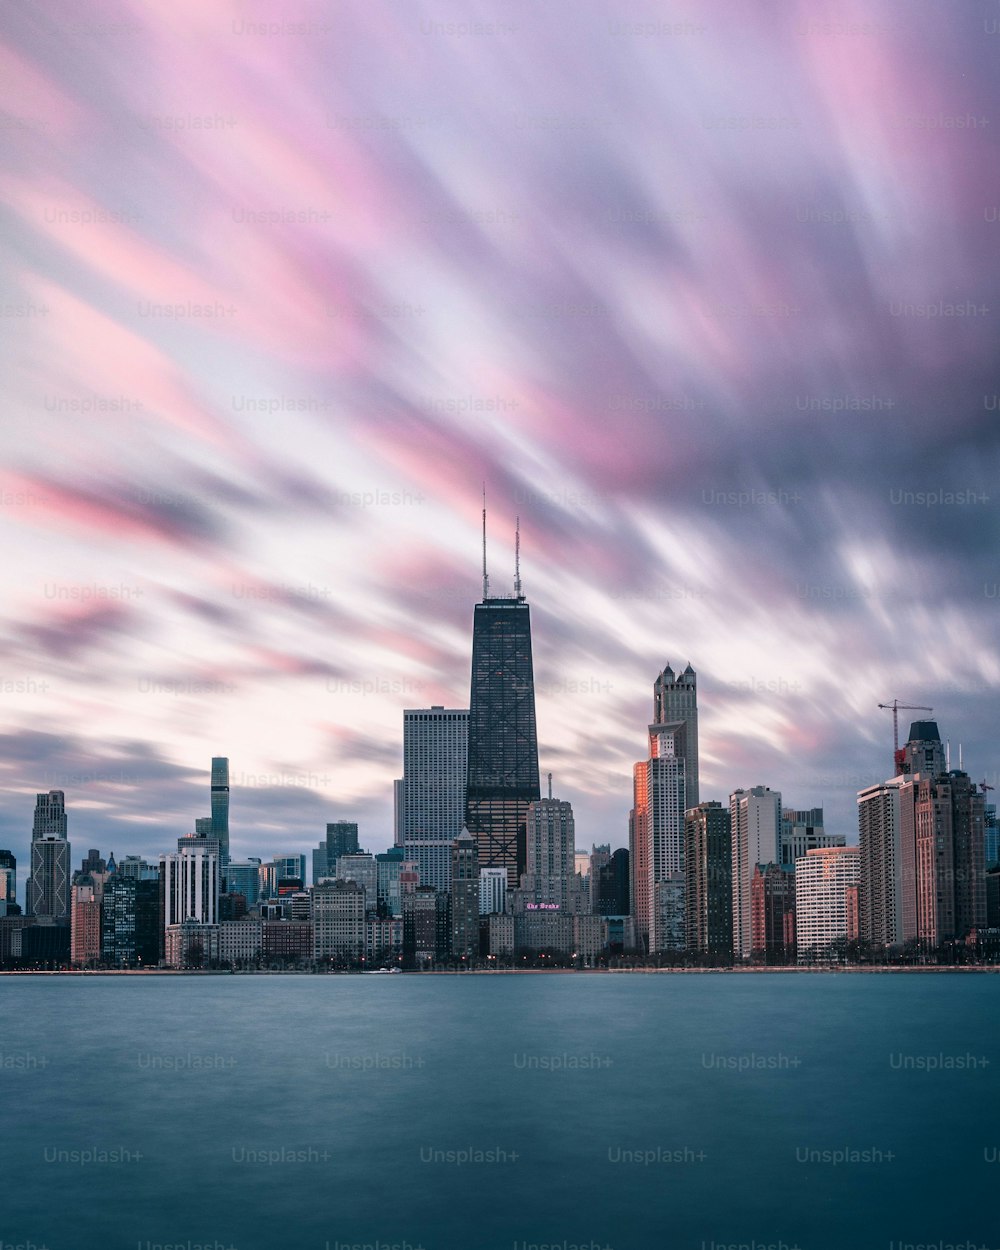 A breathtaking view of the Willis Tower in Chicago with silent blue water under a pink cloudy sky at sunrise